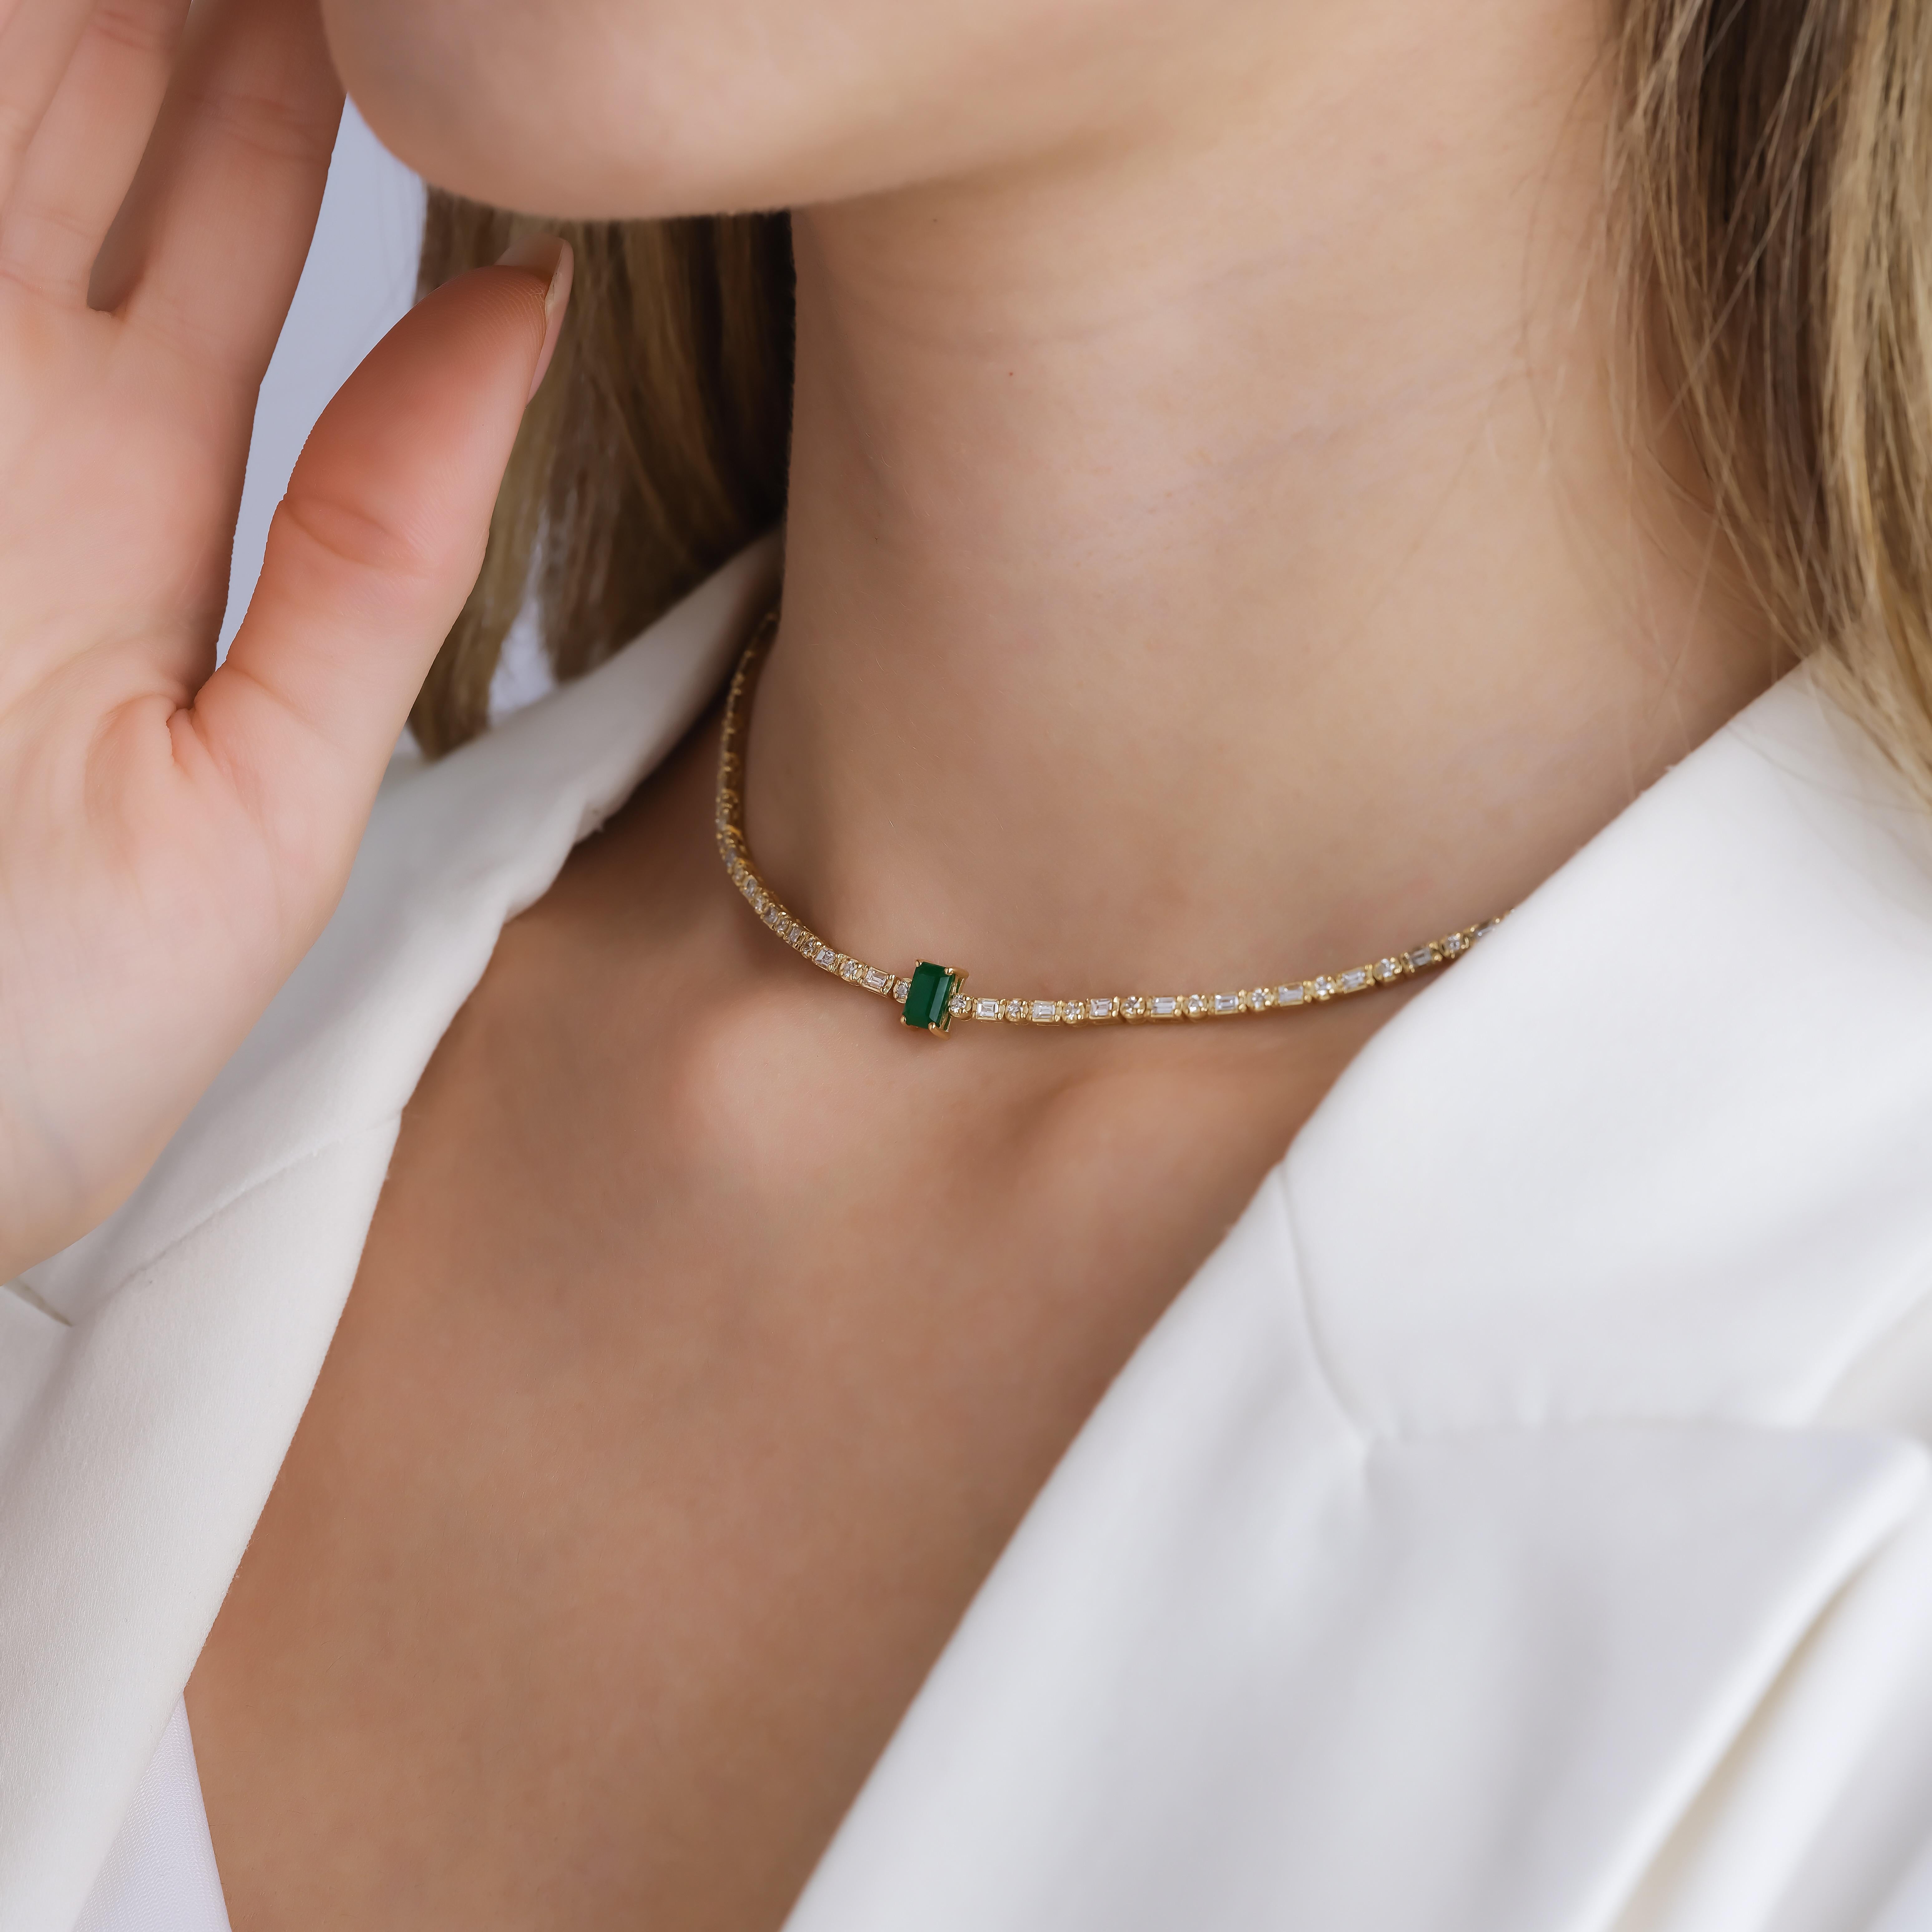 Exquisite in design and unmatched in brilliance, this necklace is a testament to timeless elegance. Crafted from solid 18kt gold, it gracefully showcases a series of breathtaking emeralds, each encapsulated by dazzling diamonds. The deep, verdant